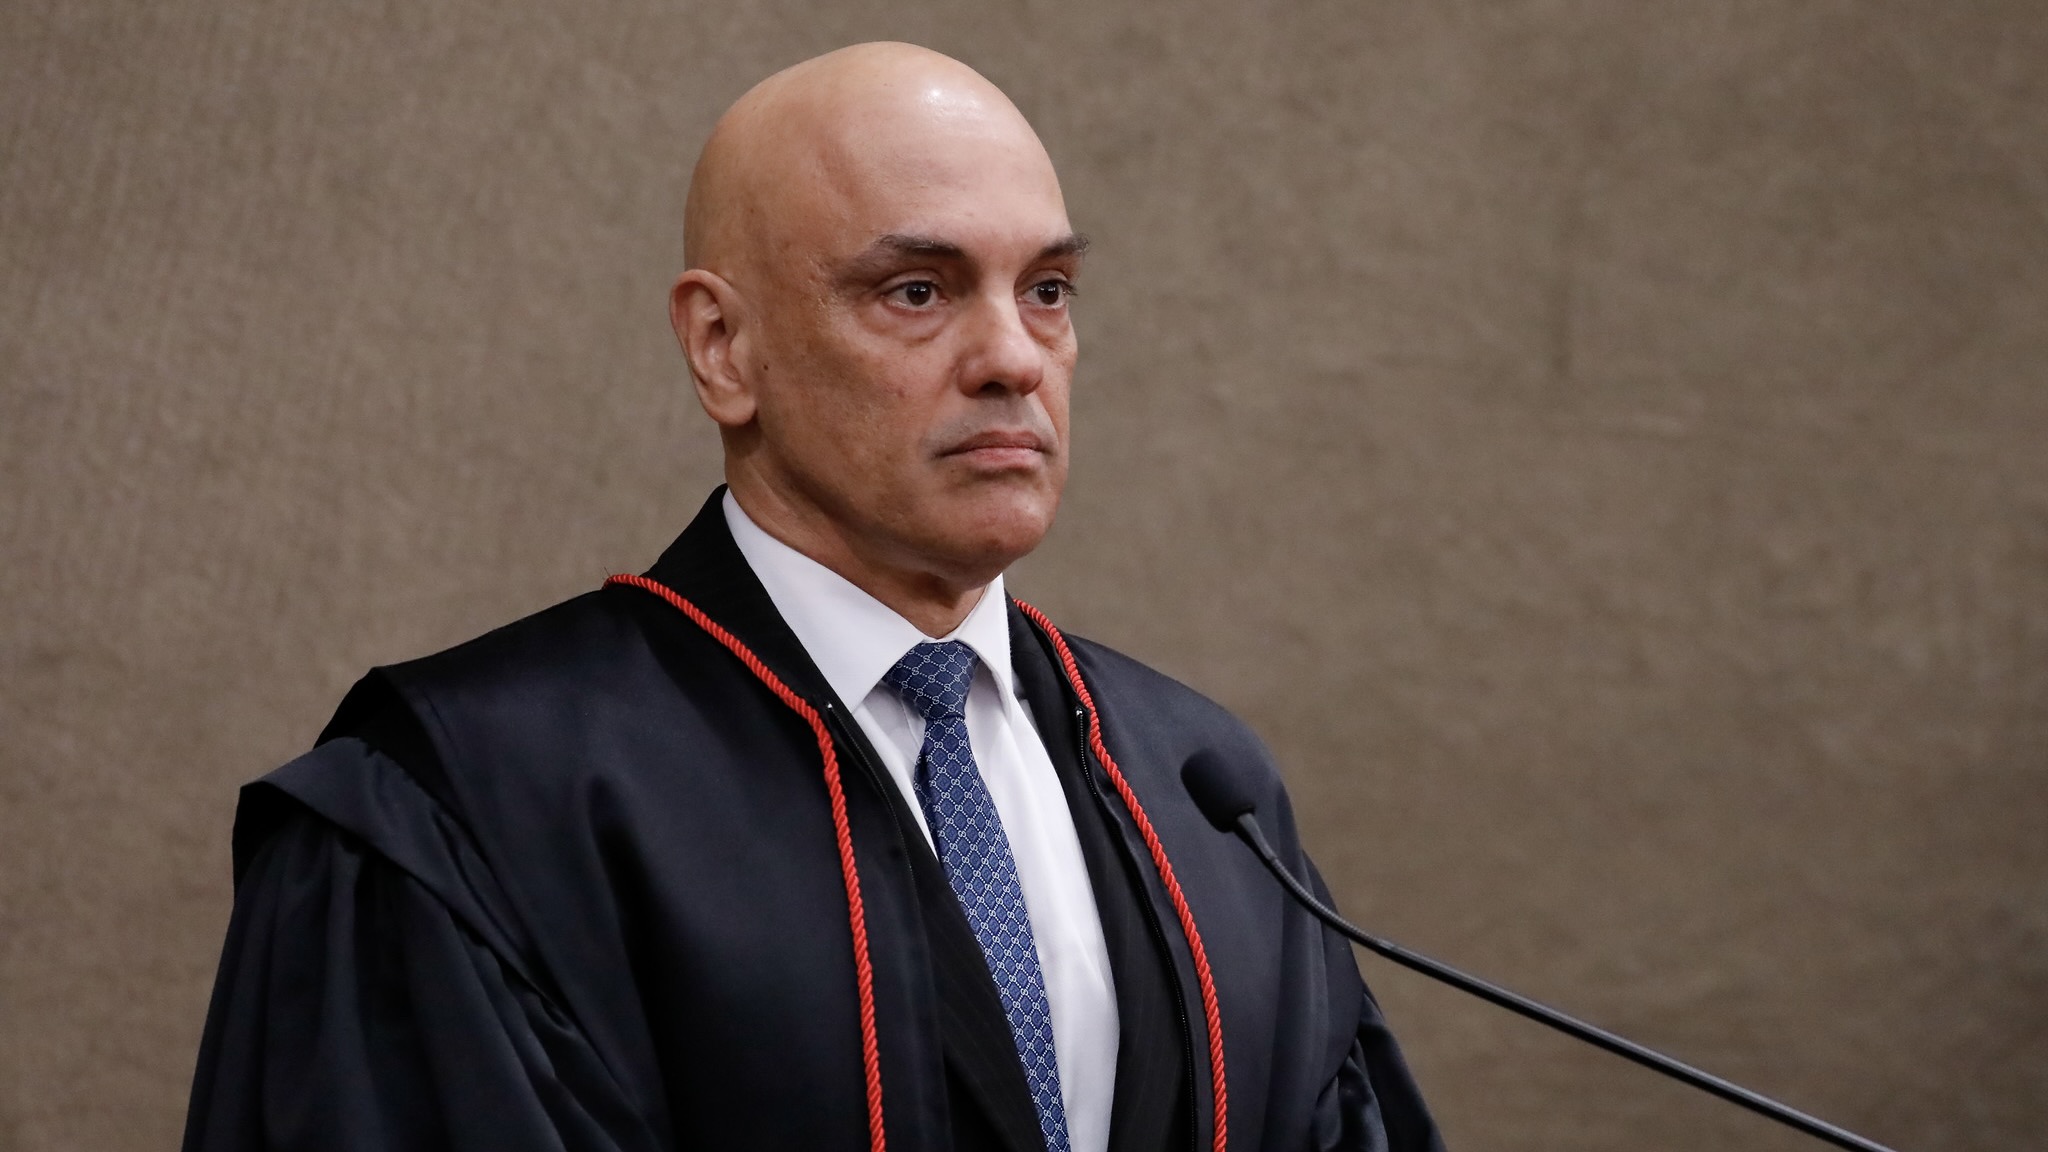 Justice Moraes demands accountability from the social media platform (Credits: Wikimedia Commons)